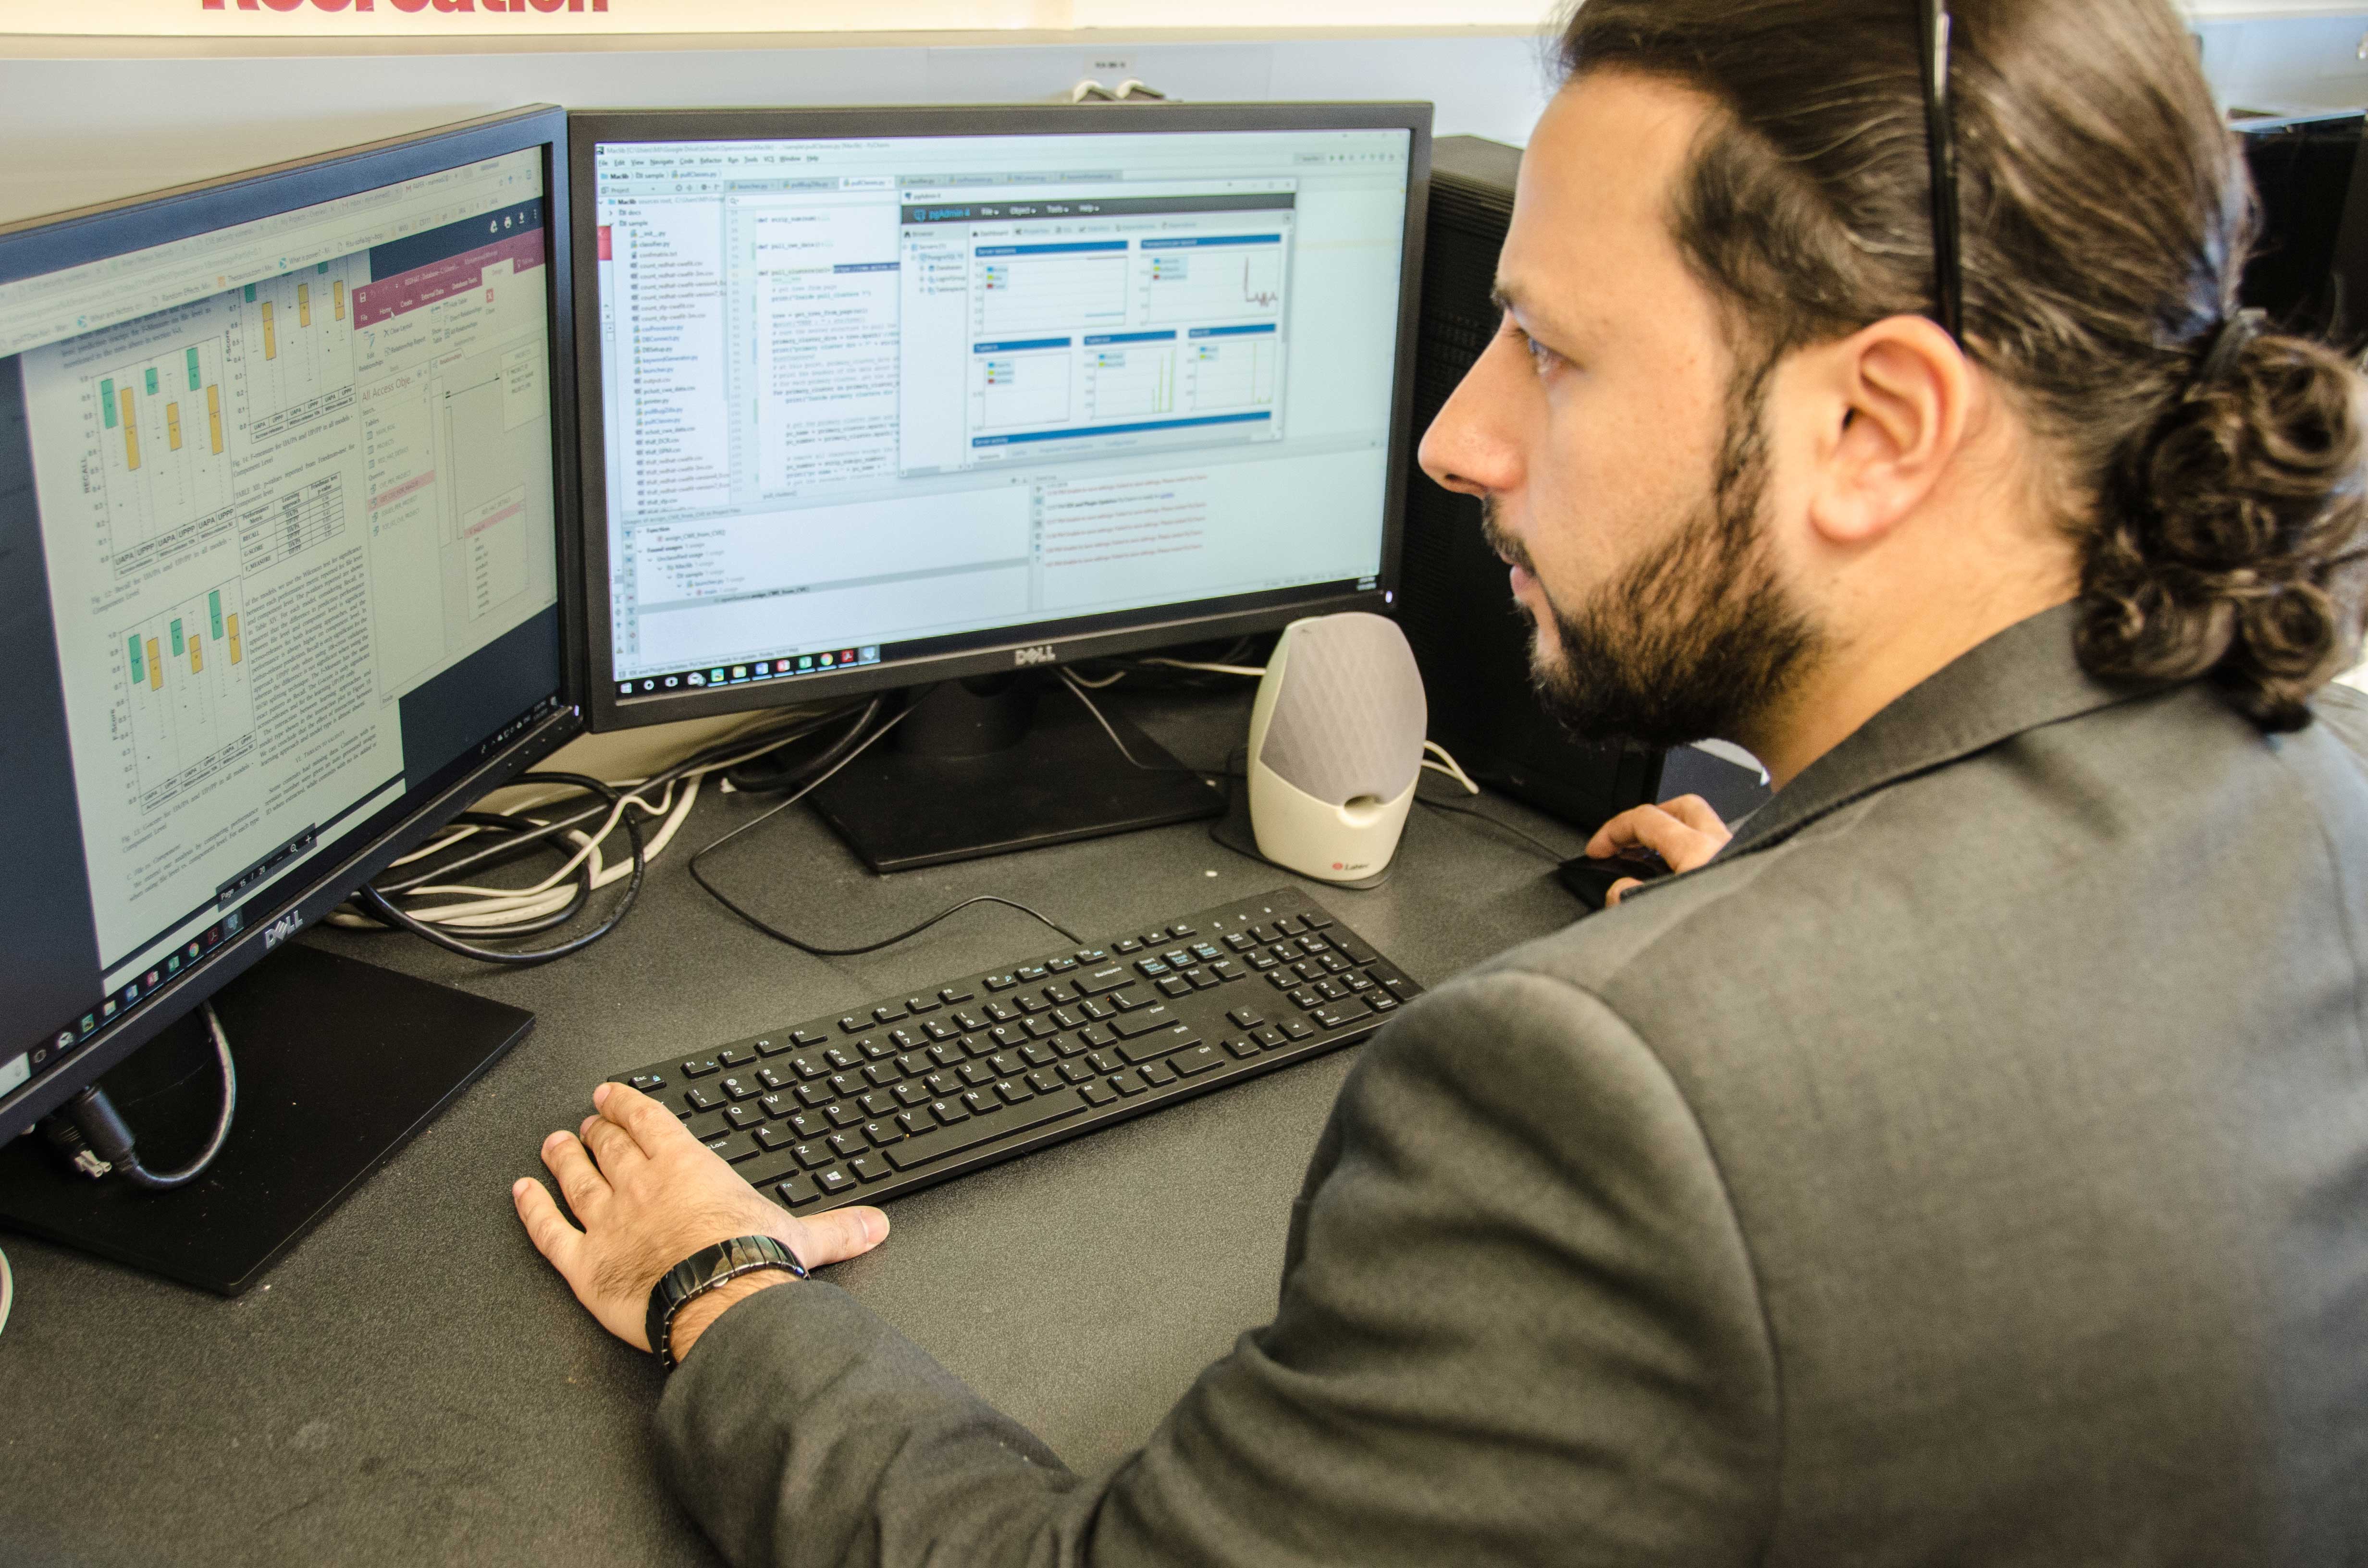 West Virginia University has partnered with Coursera, one of the largest online learning platforms in the world, to offer the online master’s degree program in software engineering. (WVU Photo/Paige Nesbit)